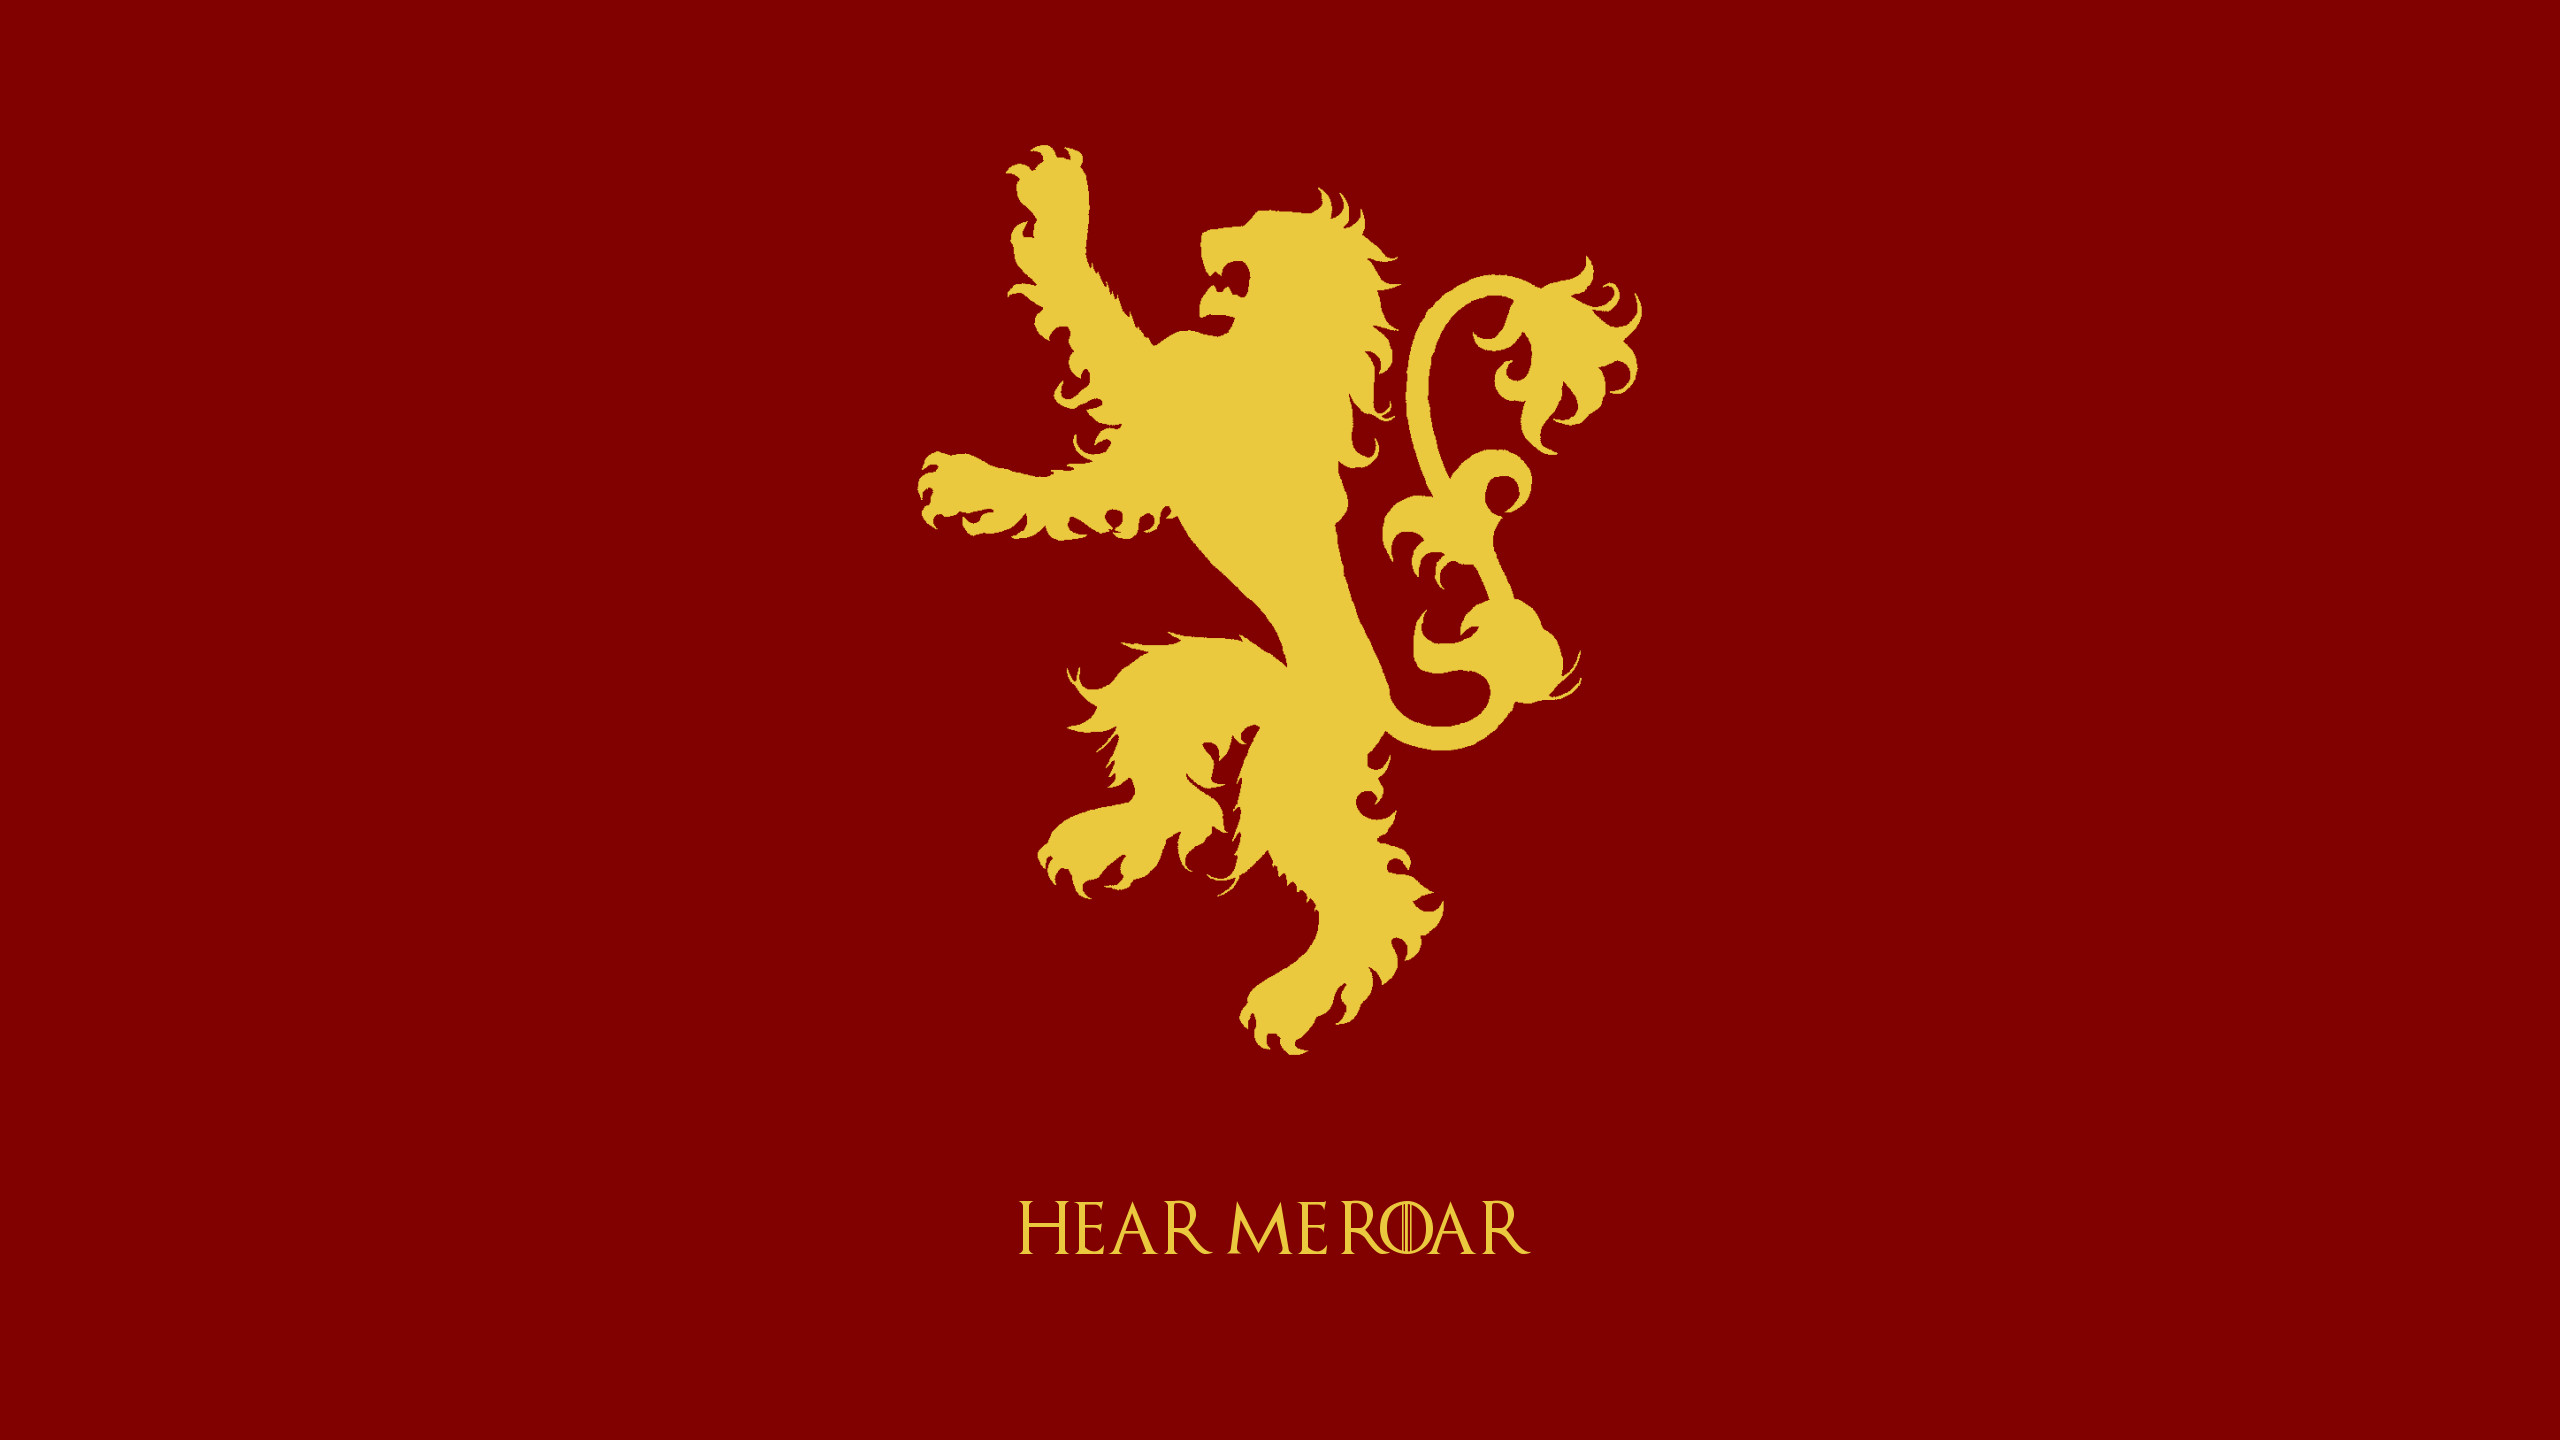 2560x1440 Game of Thrones Wallpapers - House Sigils (2560 x 1440) - Album on Imgur